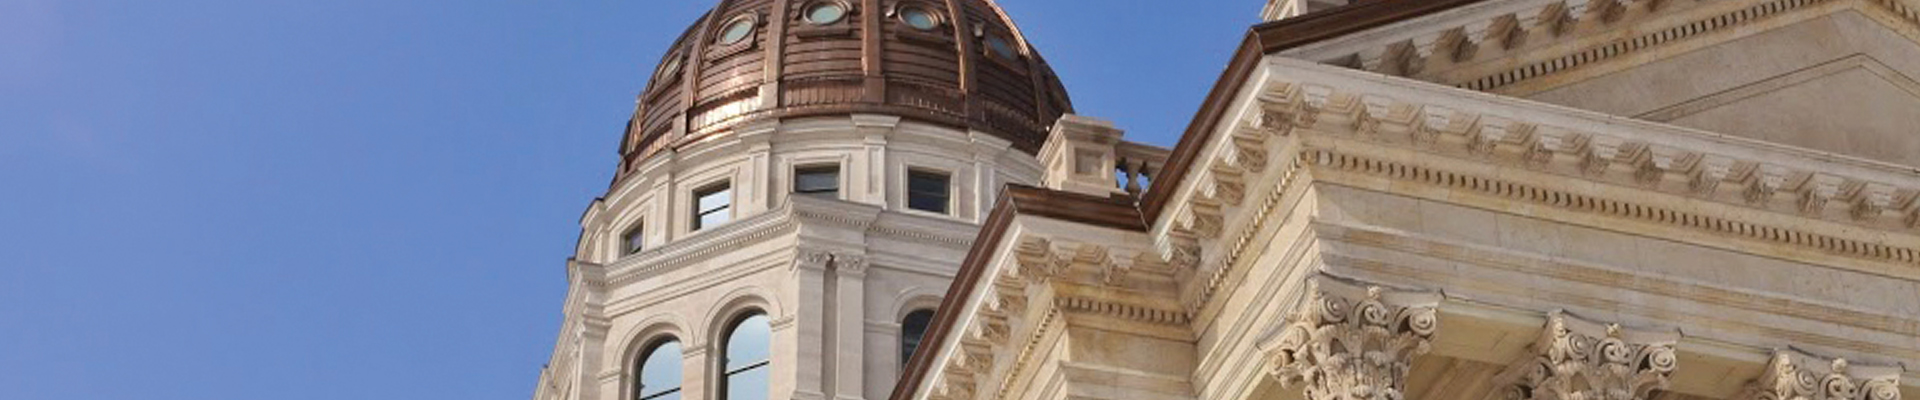 Photograph: Dome of the Kansas State Capitol building.